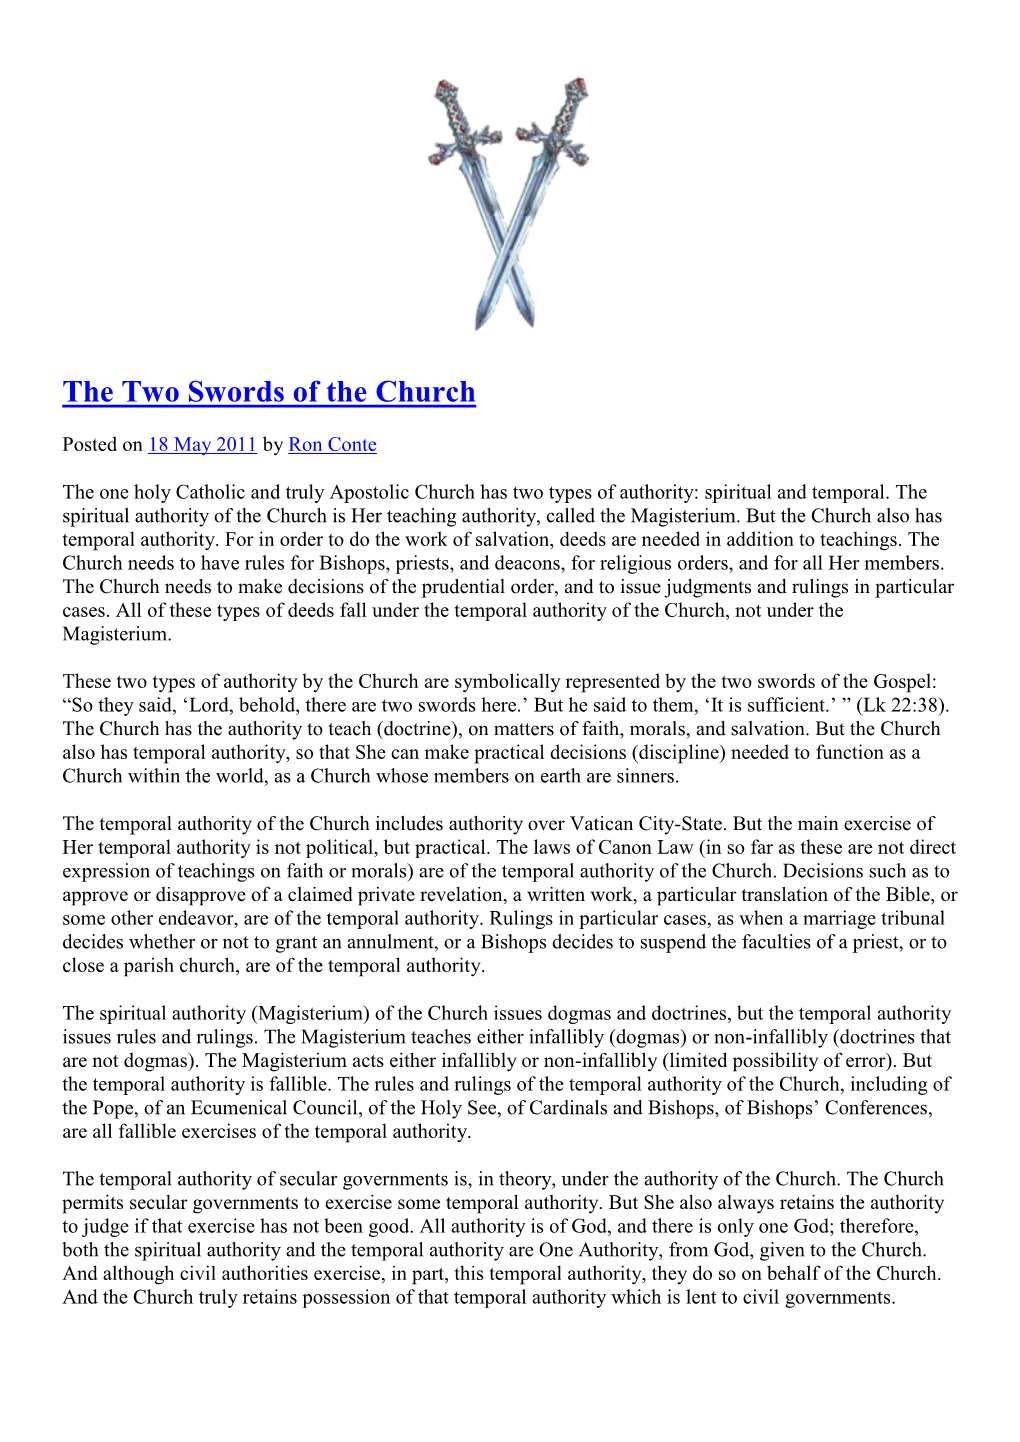 The Two Swords of the Church